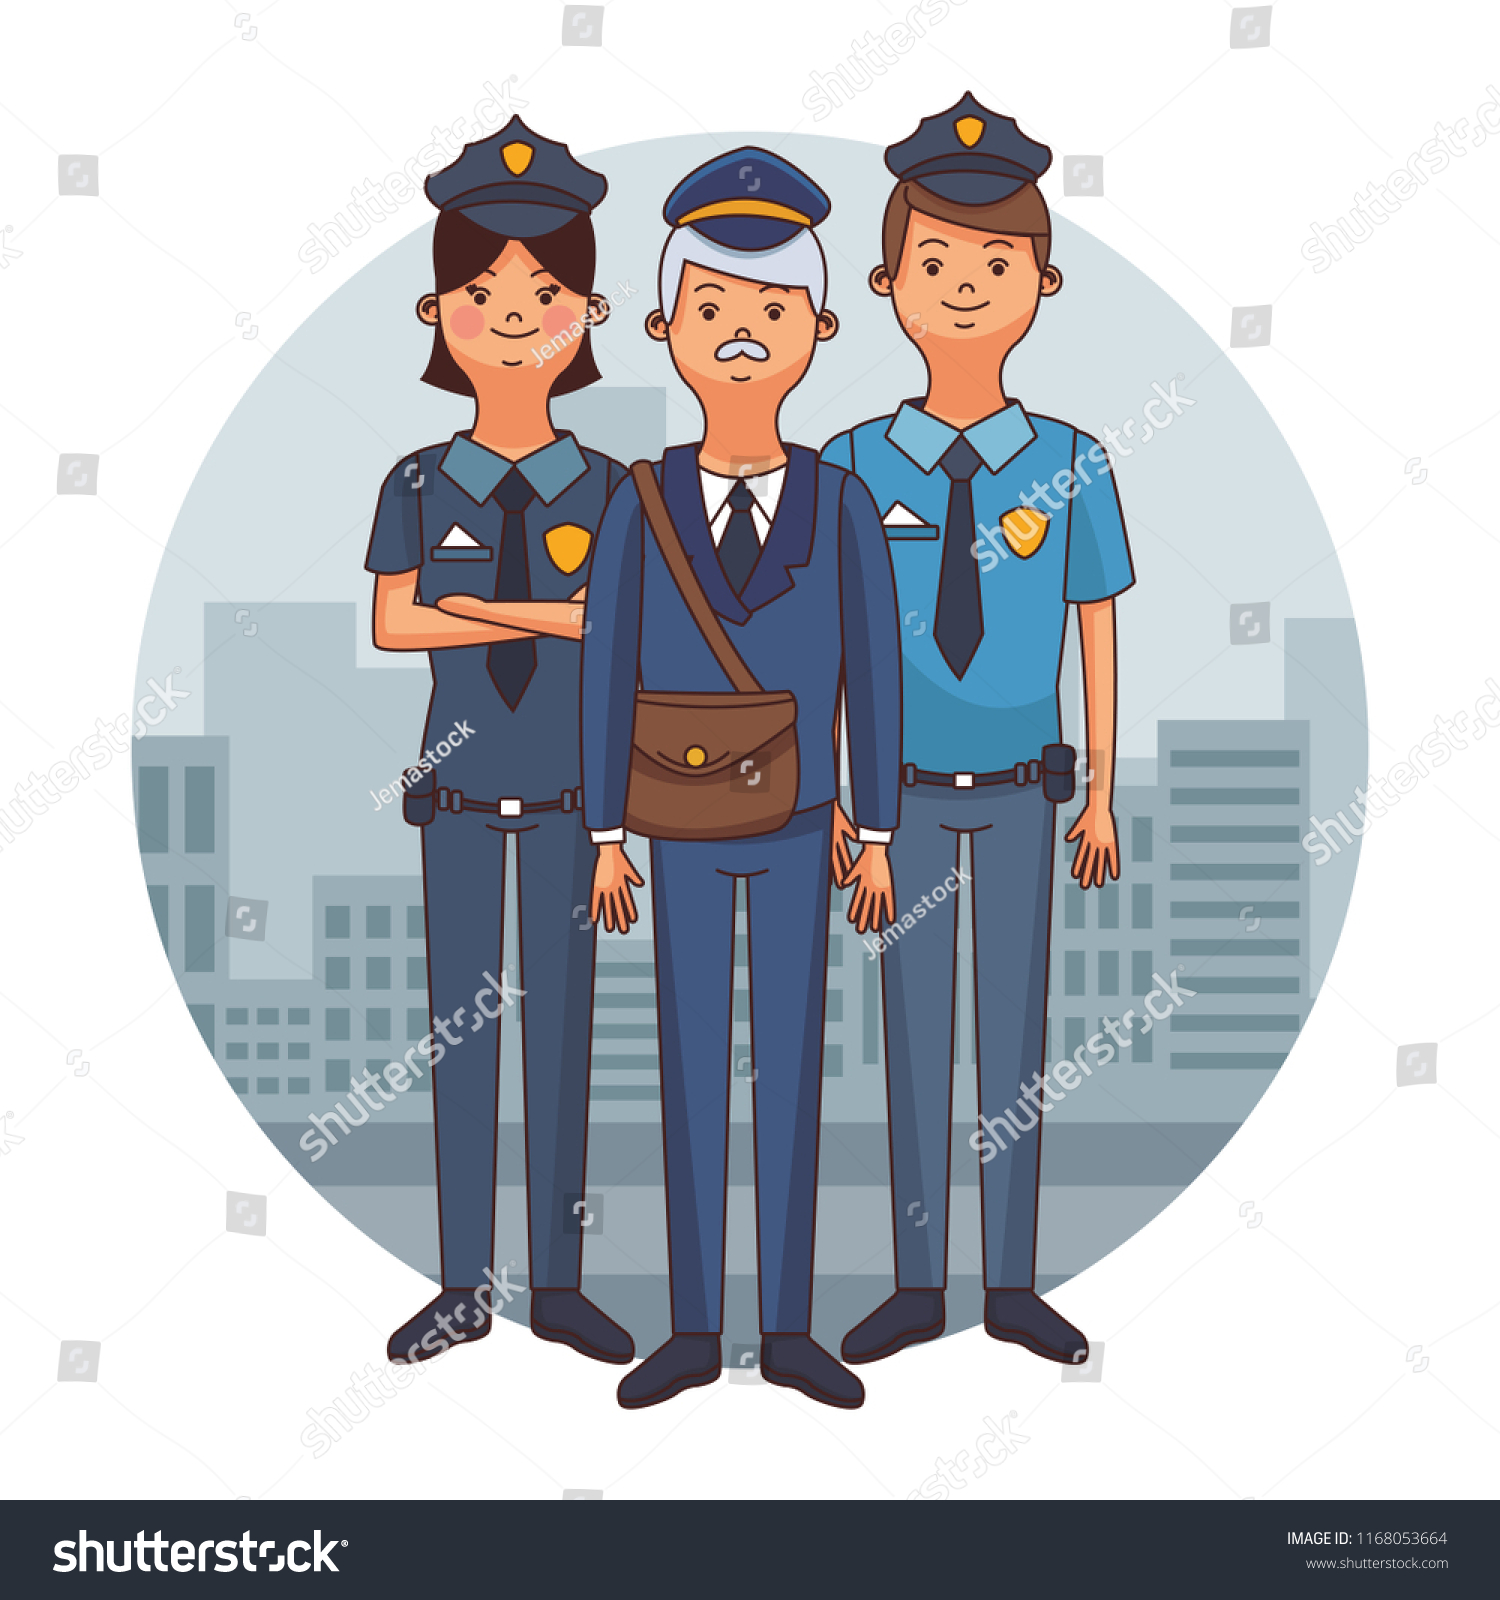 Police Officers Cartoons Stock Vector Royalty Free 1168053664 